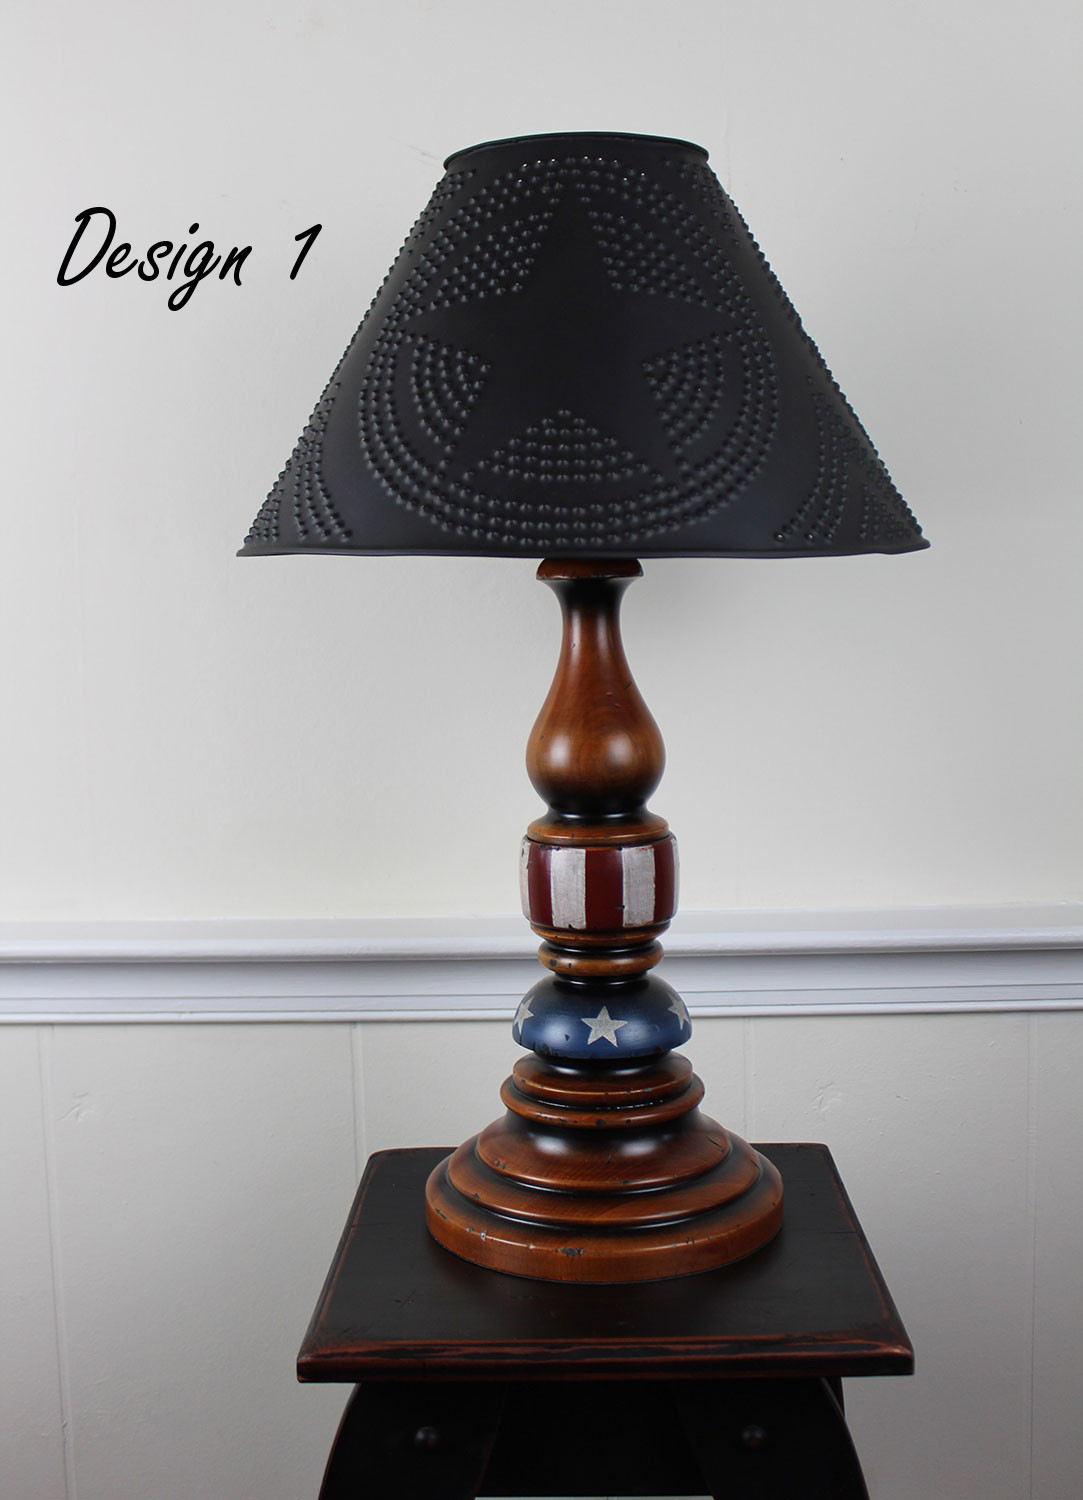 Katie's Handcrafted Lighting - Large Liberty Lamp - Primitive Table Lamps